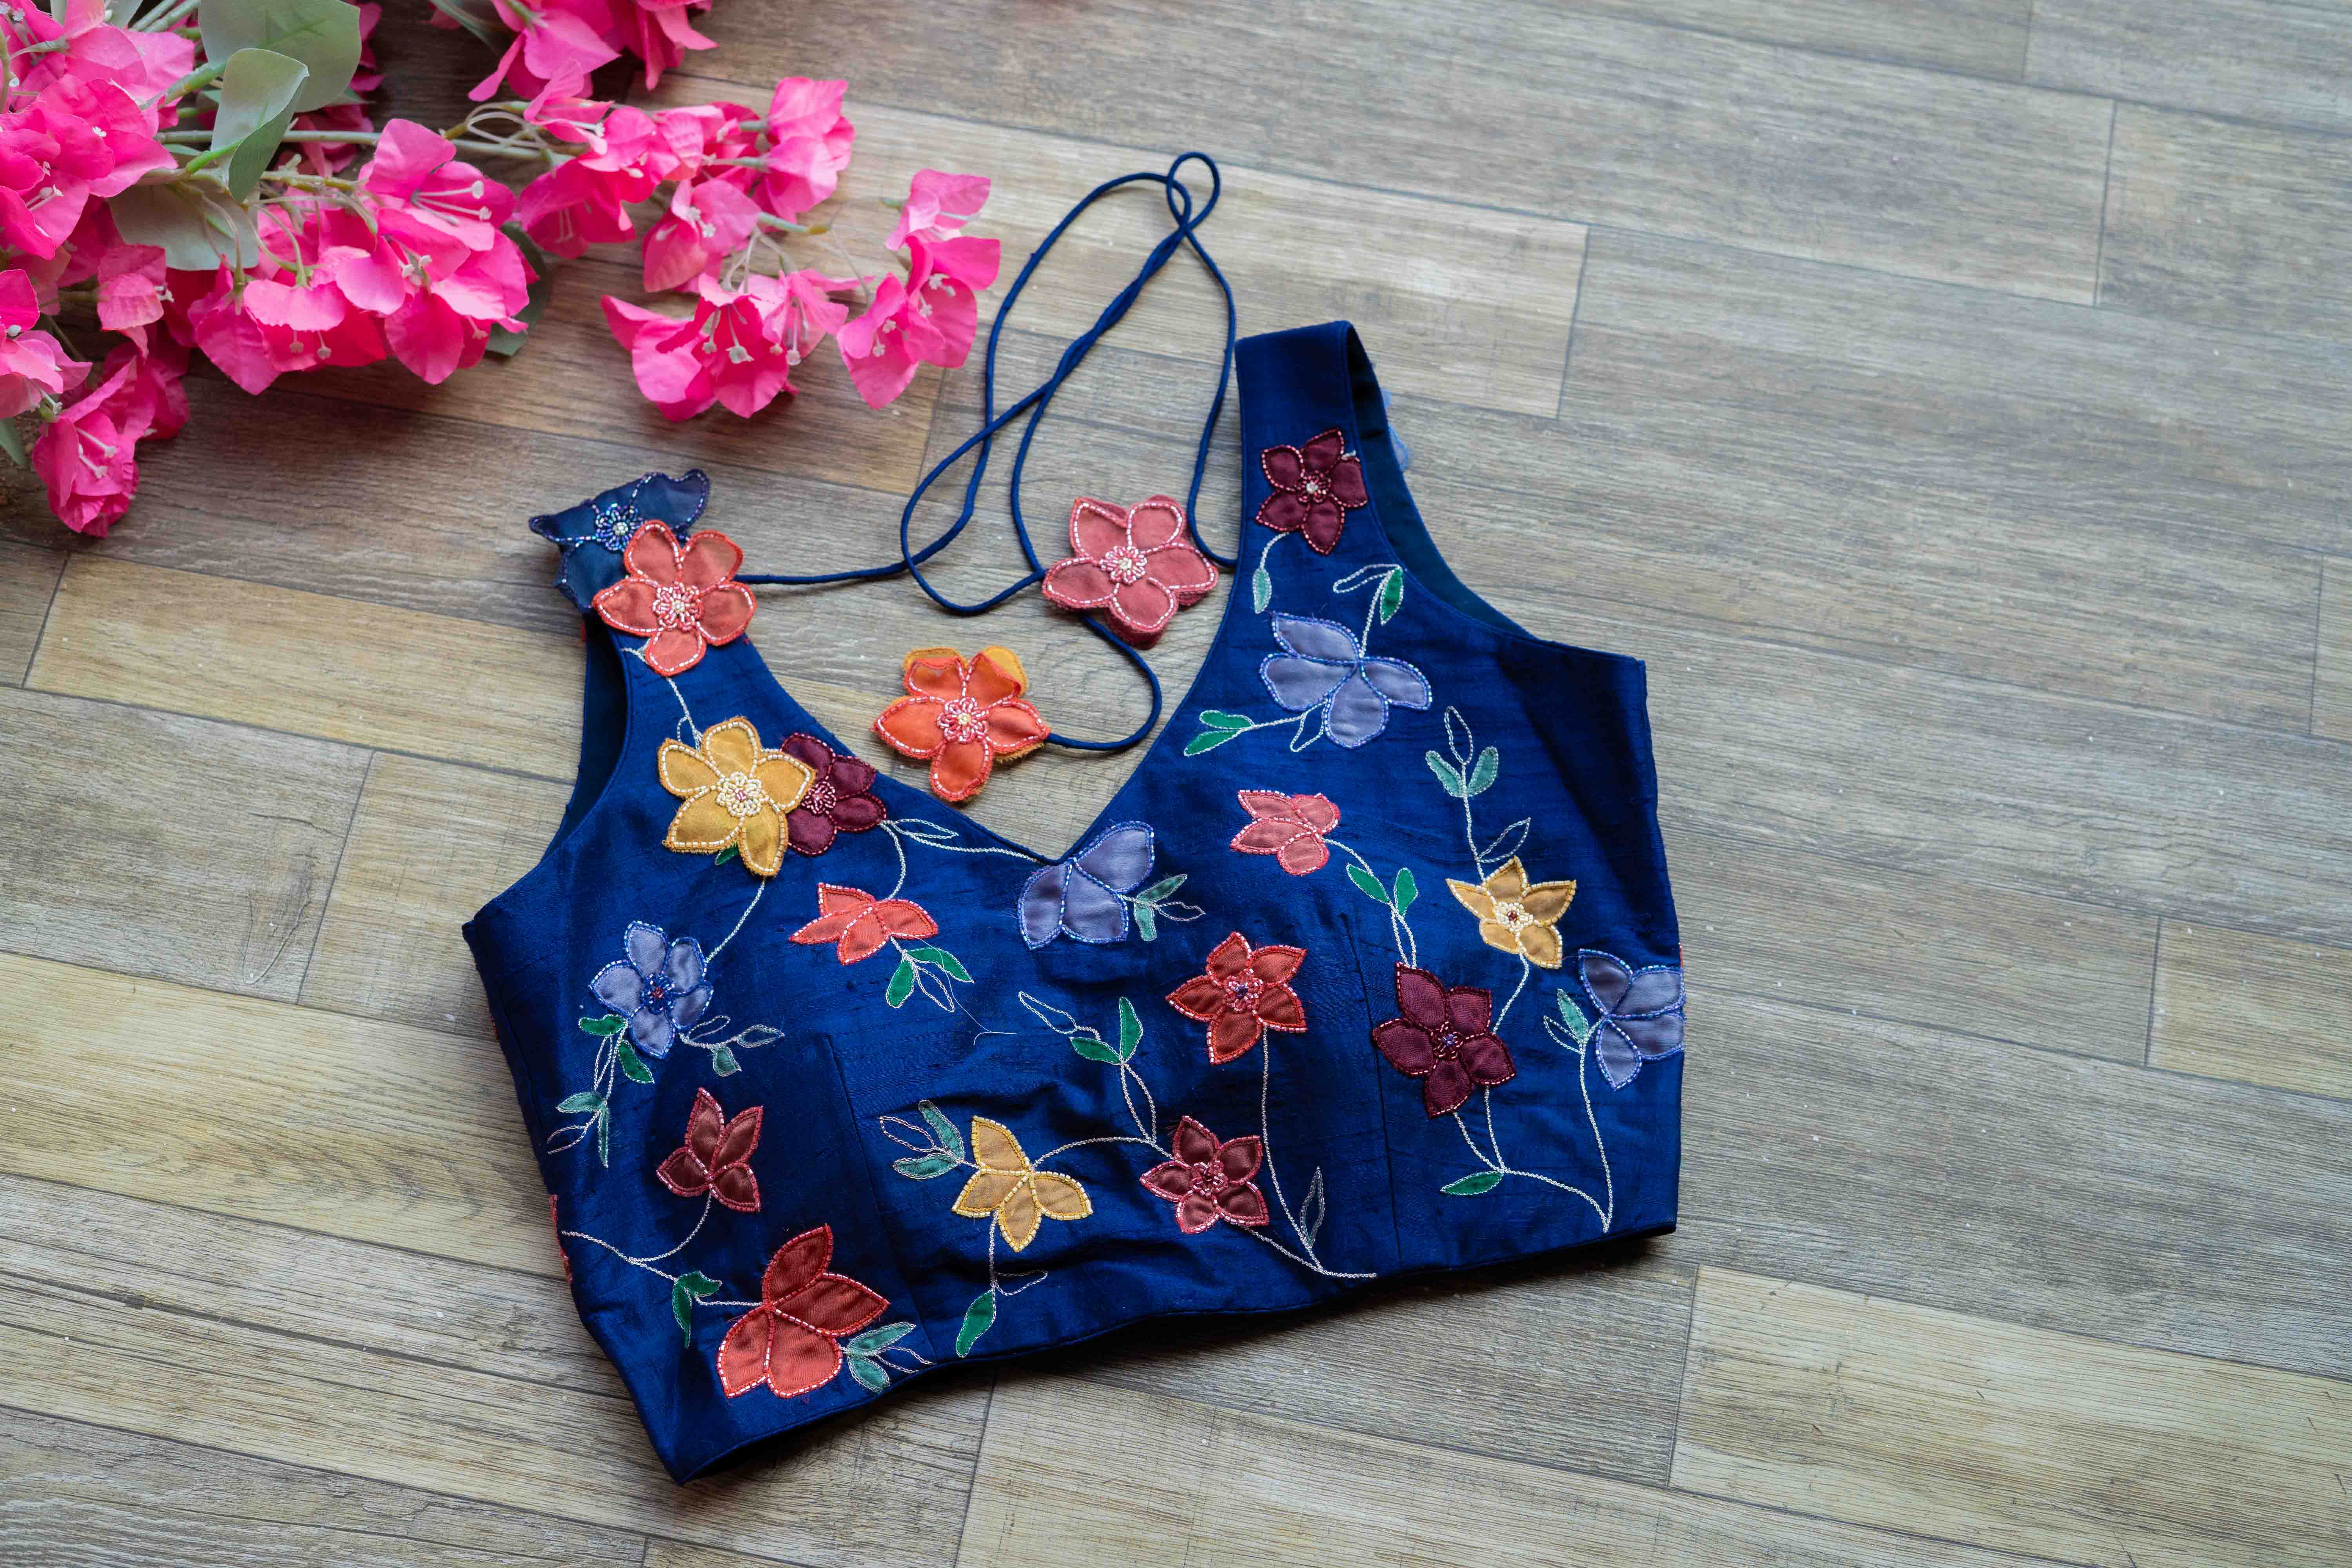 Deep blue applique embroidered blouse